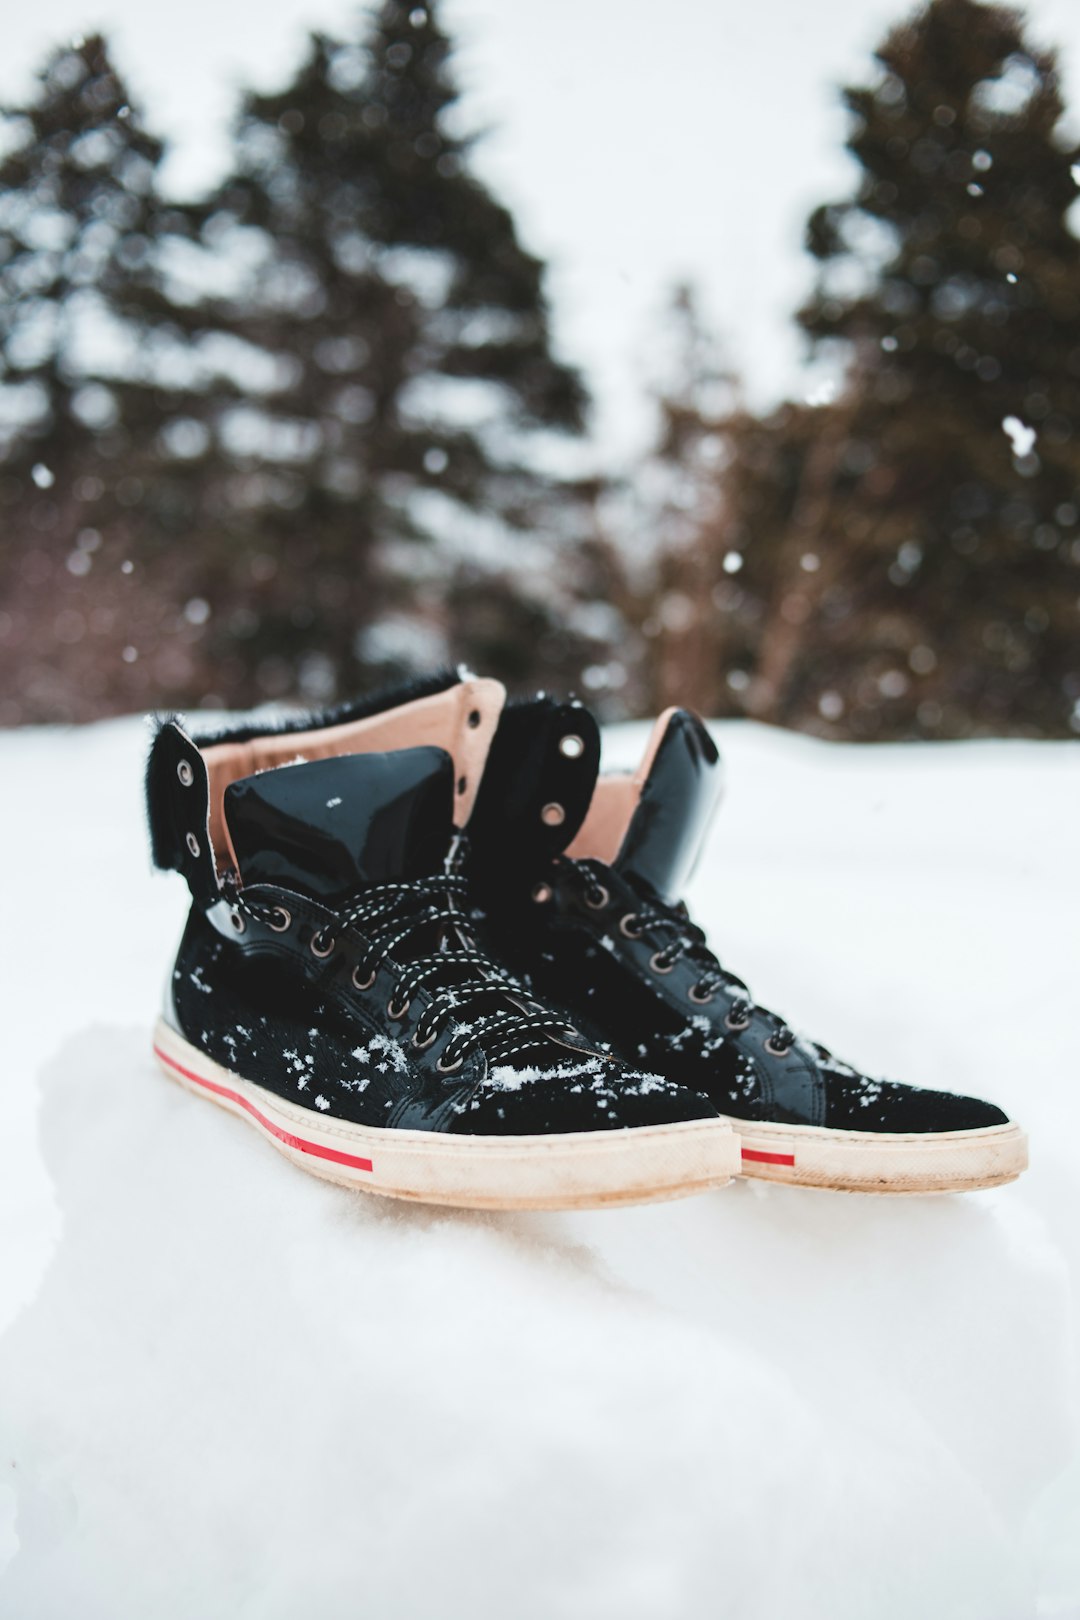 black and red air jordan 6 shoe on snow